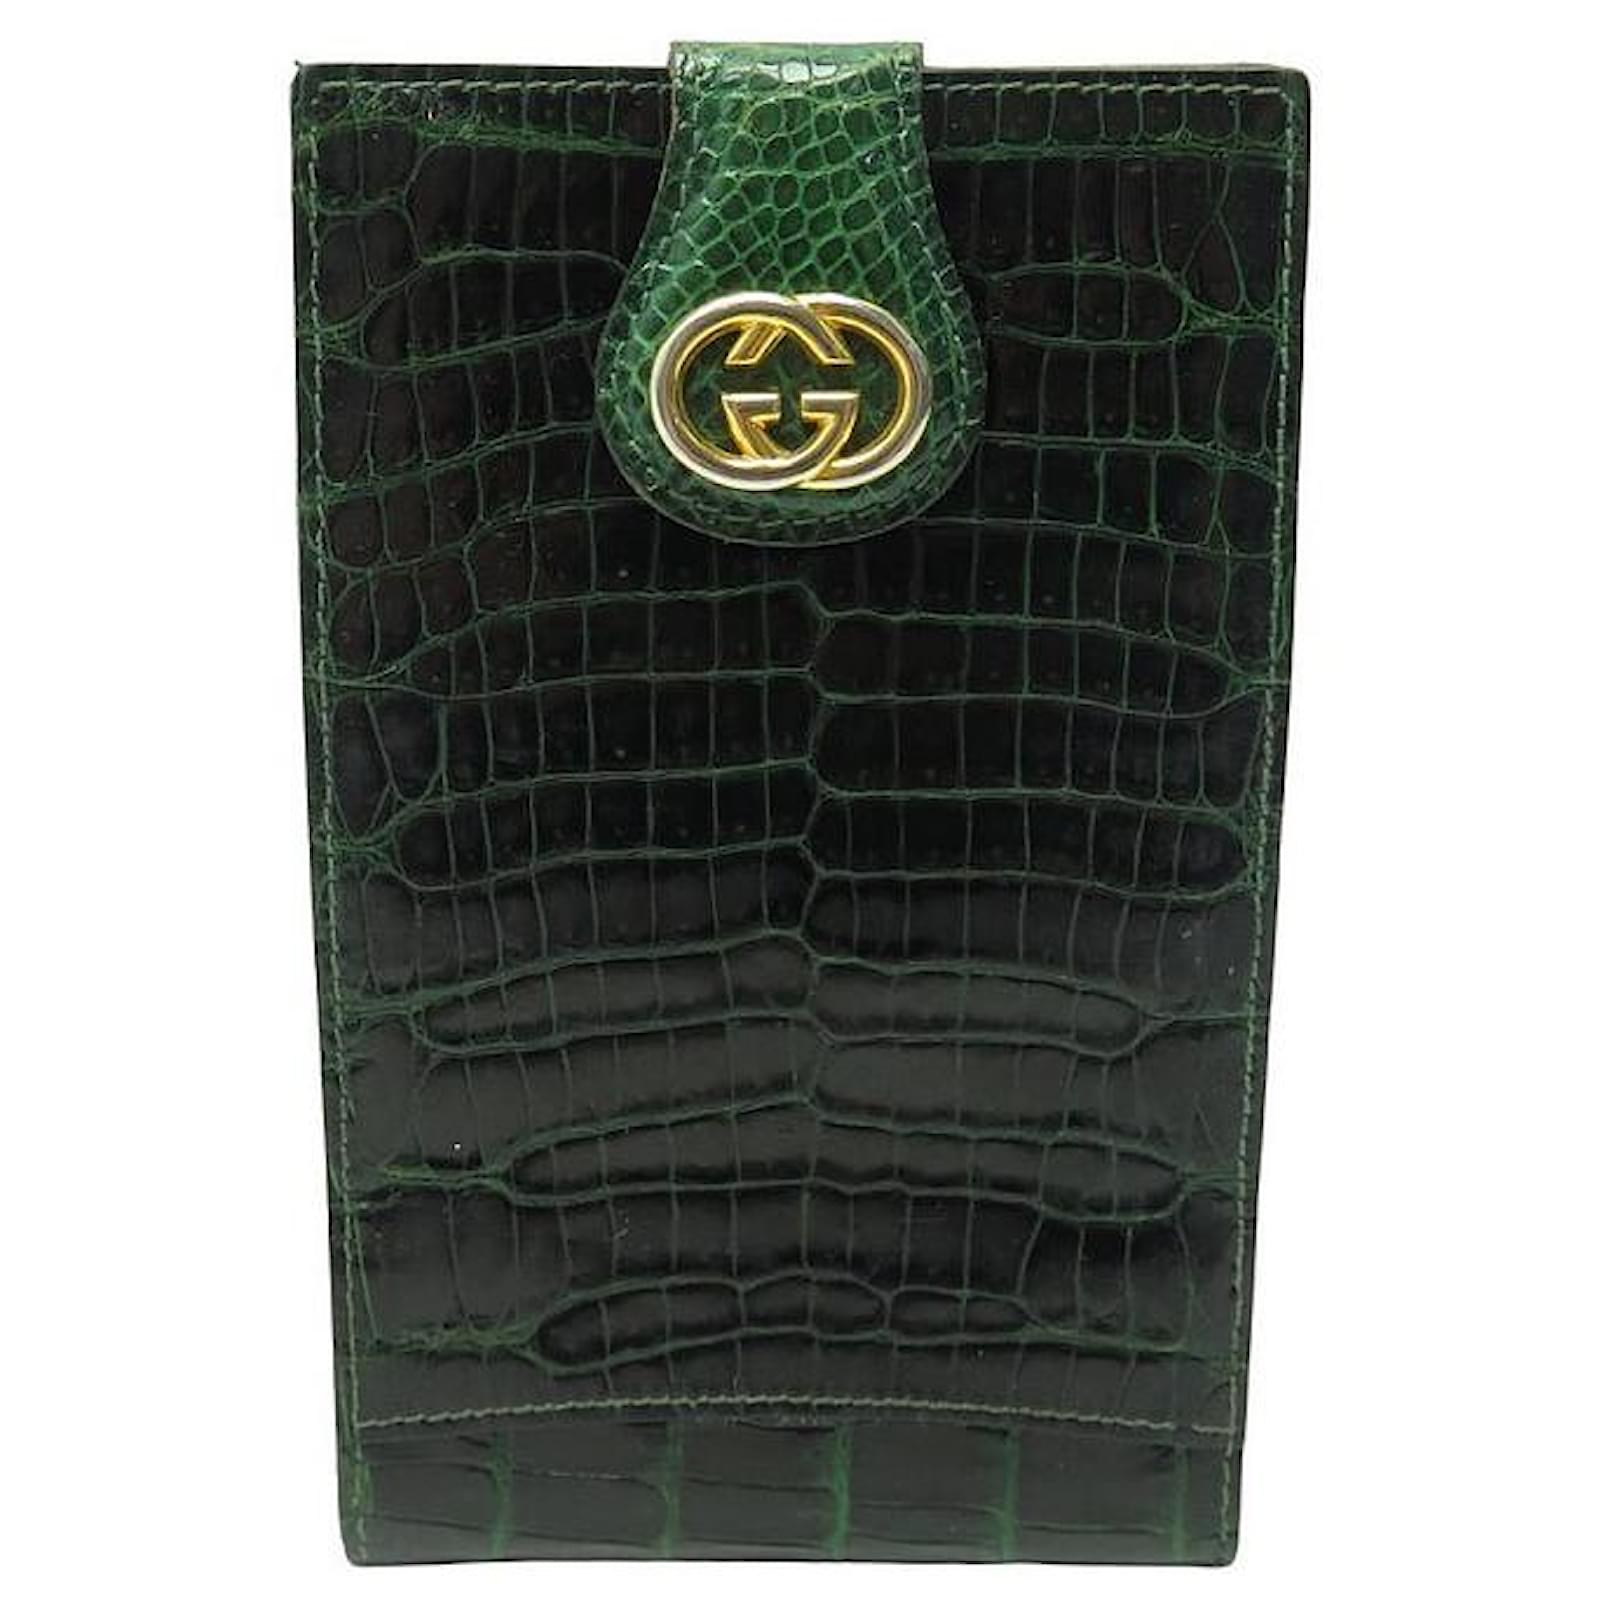 Gg marmont leather classic wallet - Gucci - Men